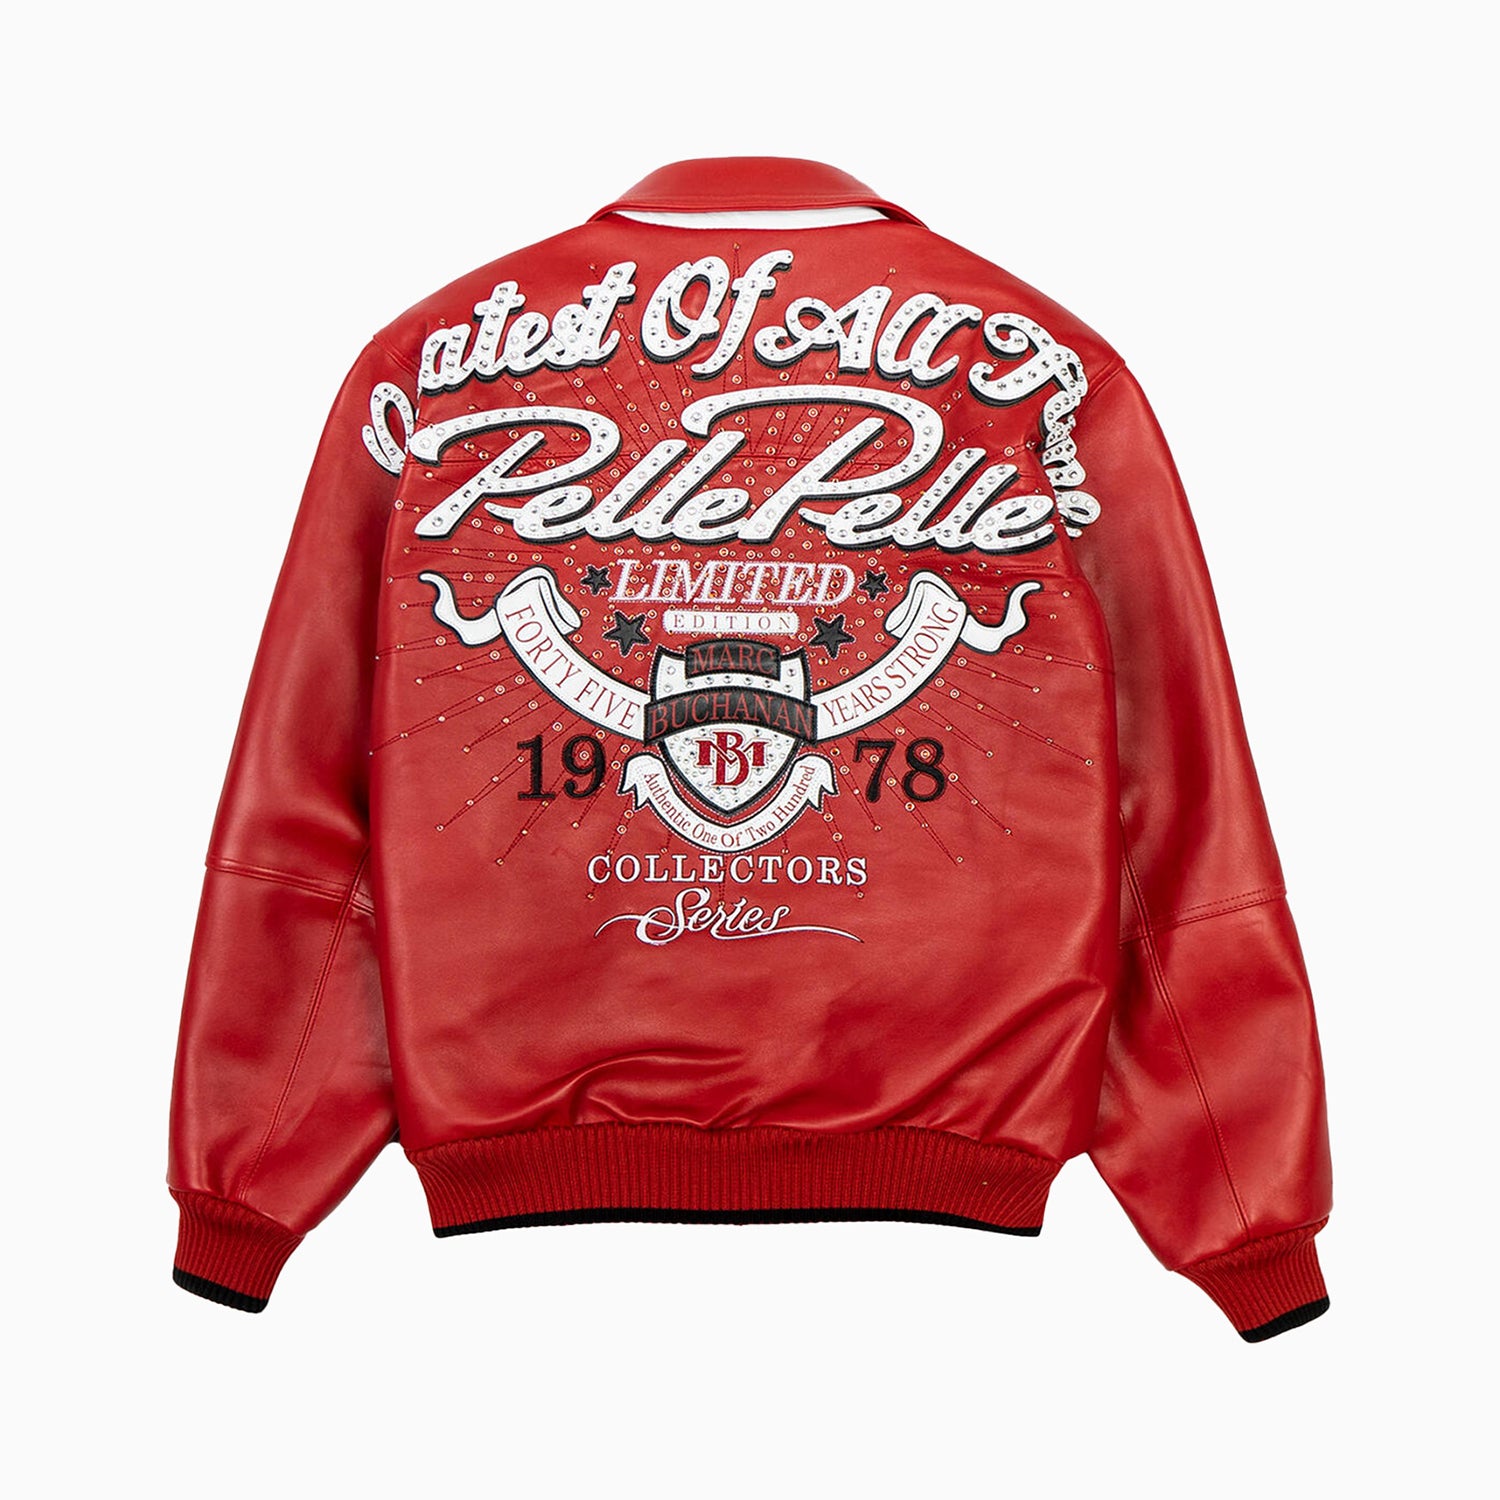 pelle-pelle-mens-greatest-of-all-time-leather-jacket-323-37482-cwb